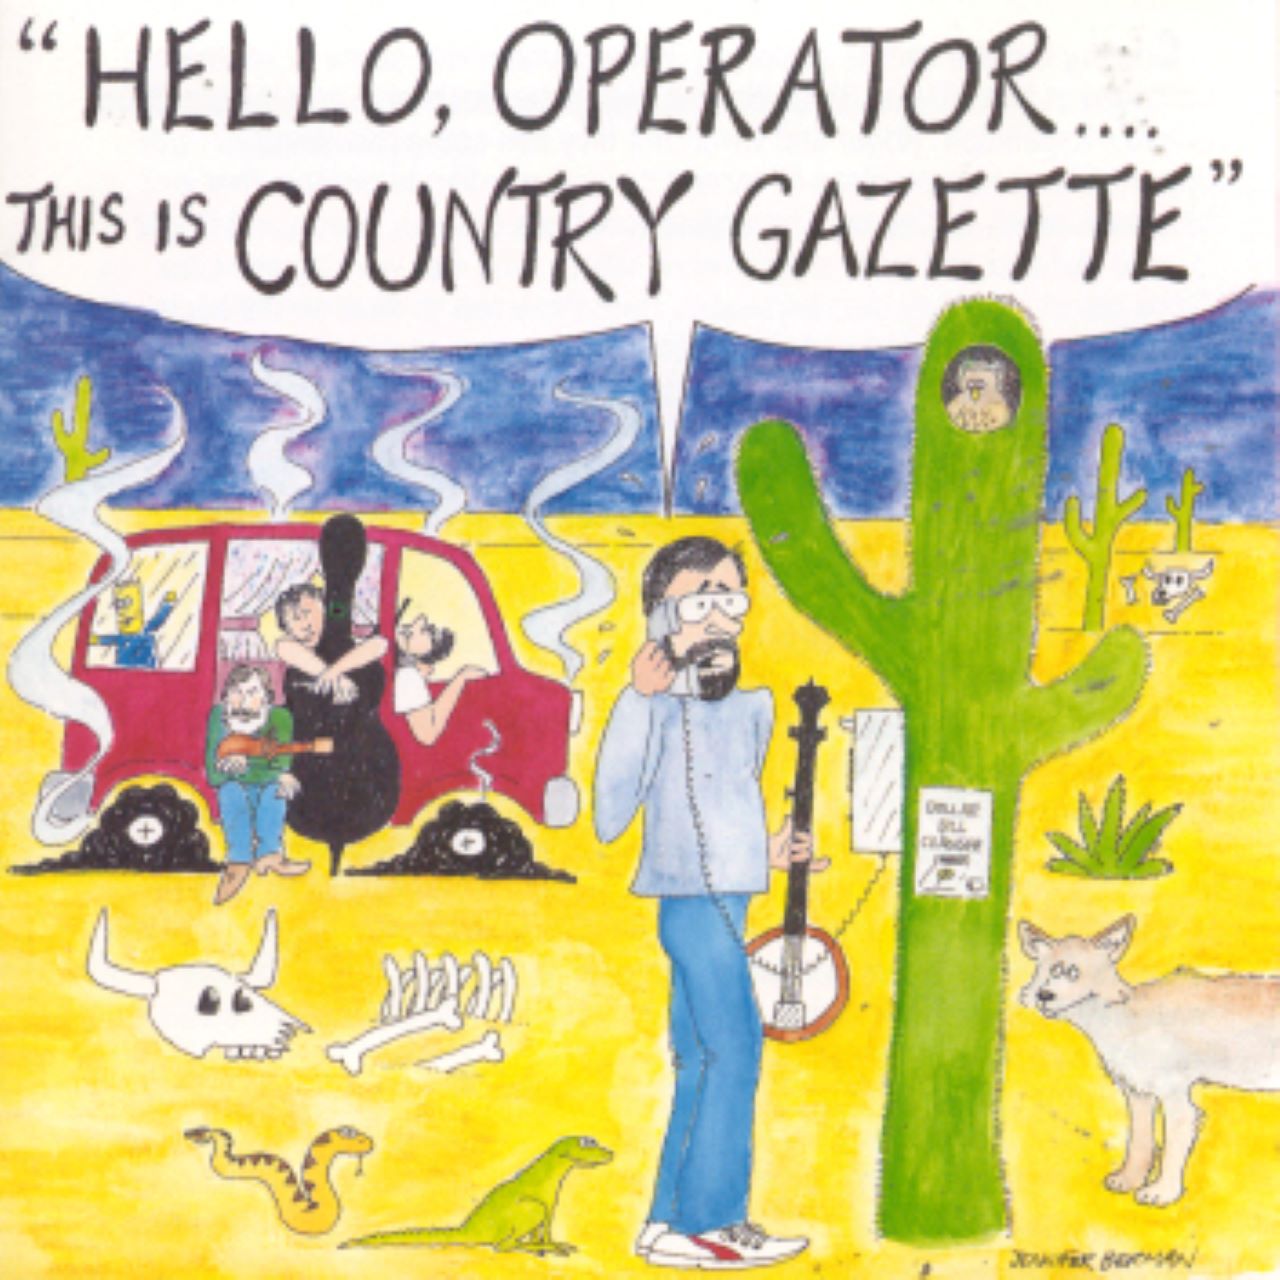 Country Gazette - Hello, Operator…This Is Country Gazette cover album